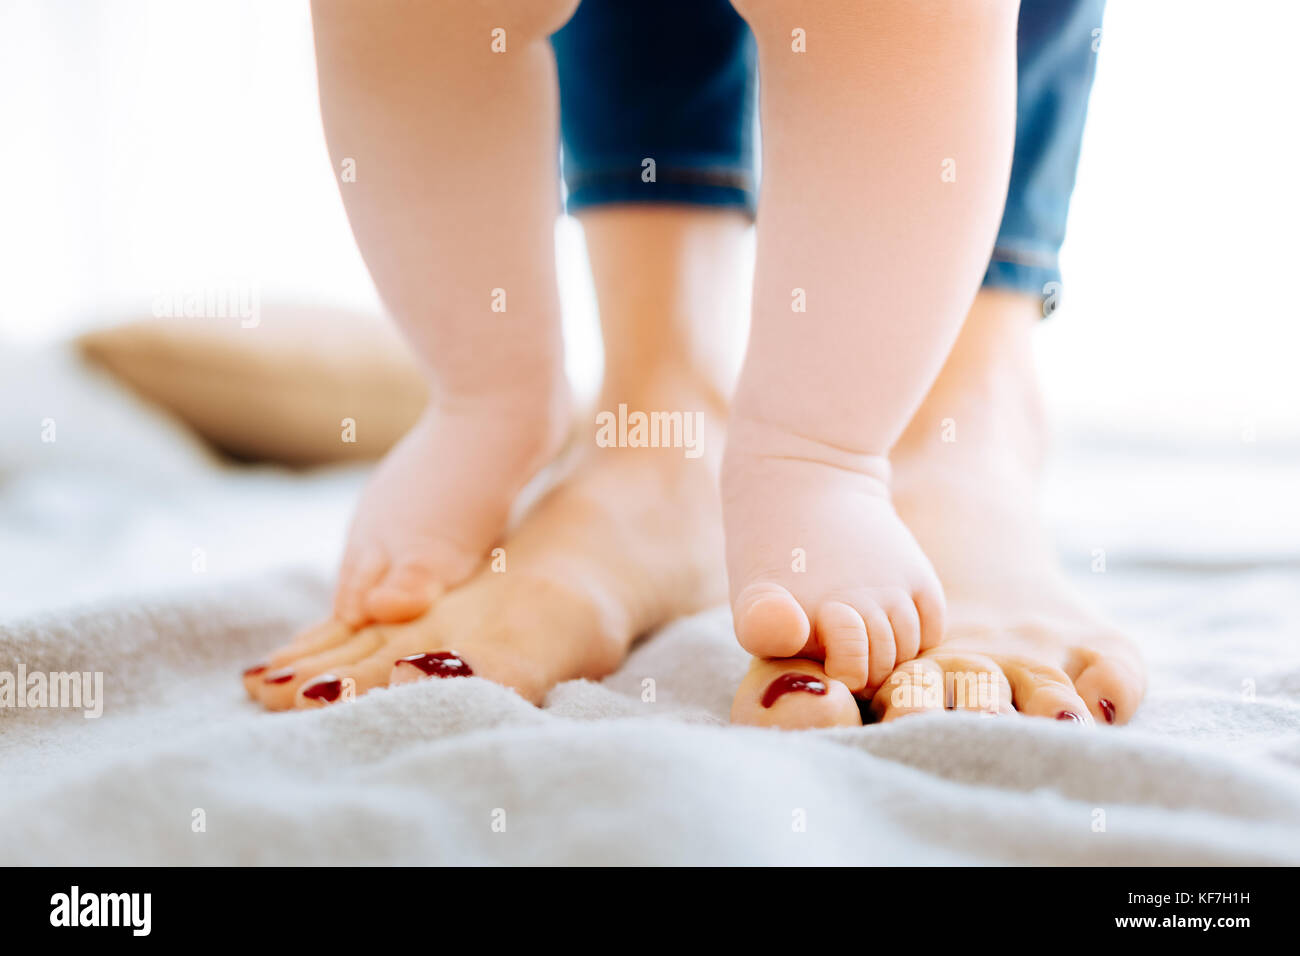 Cute little child attempting to take steps Stock Photo